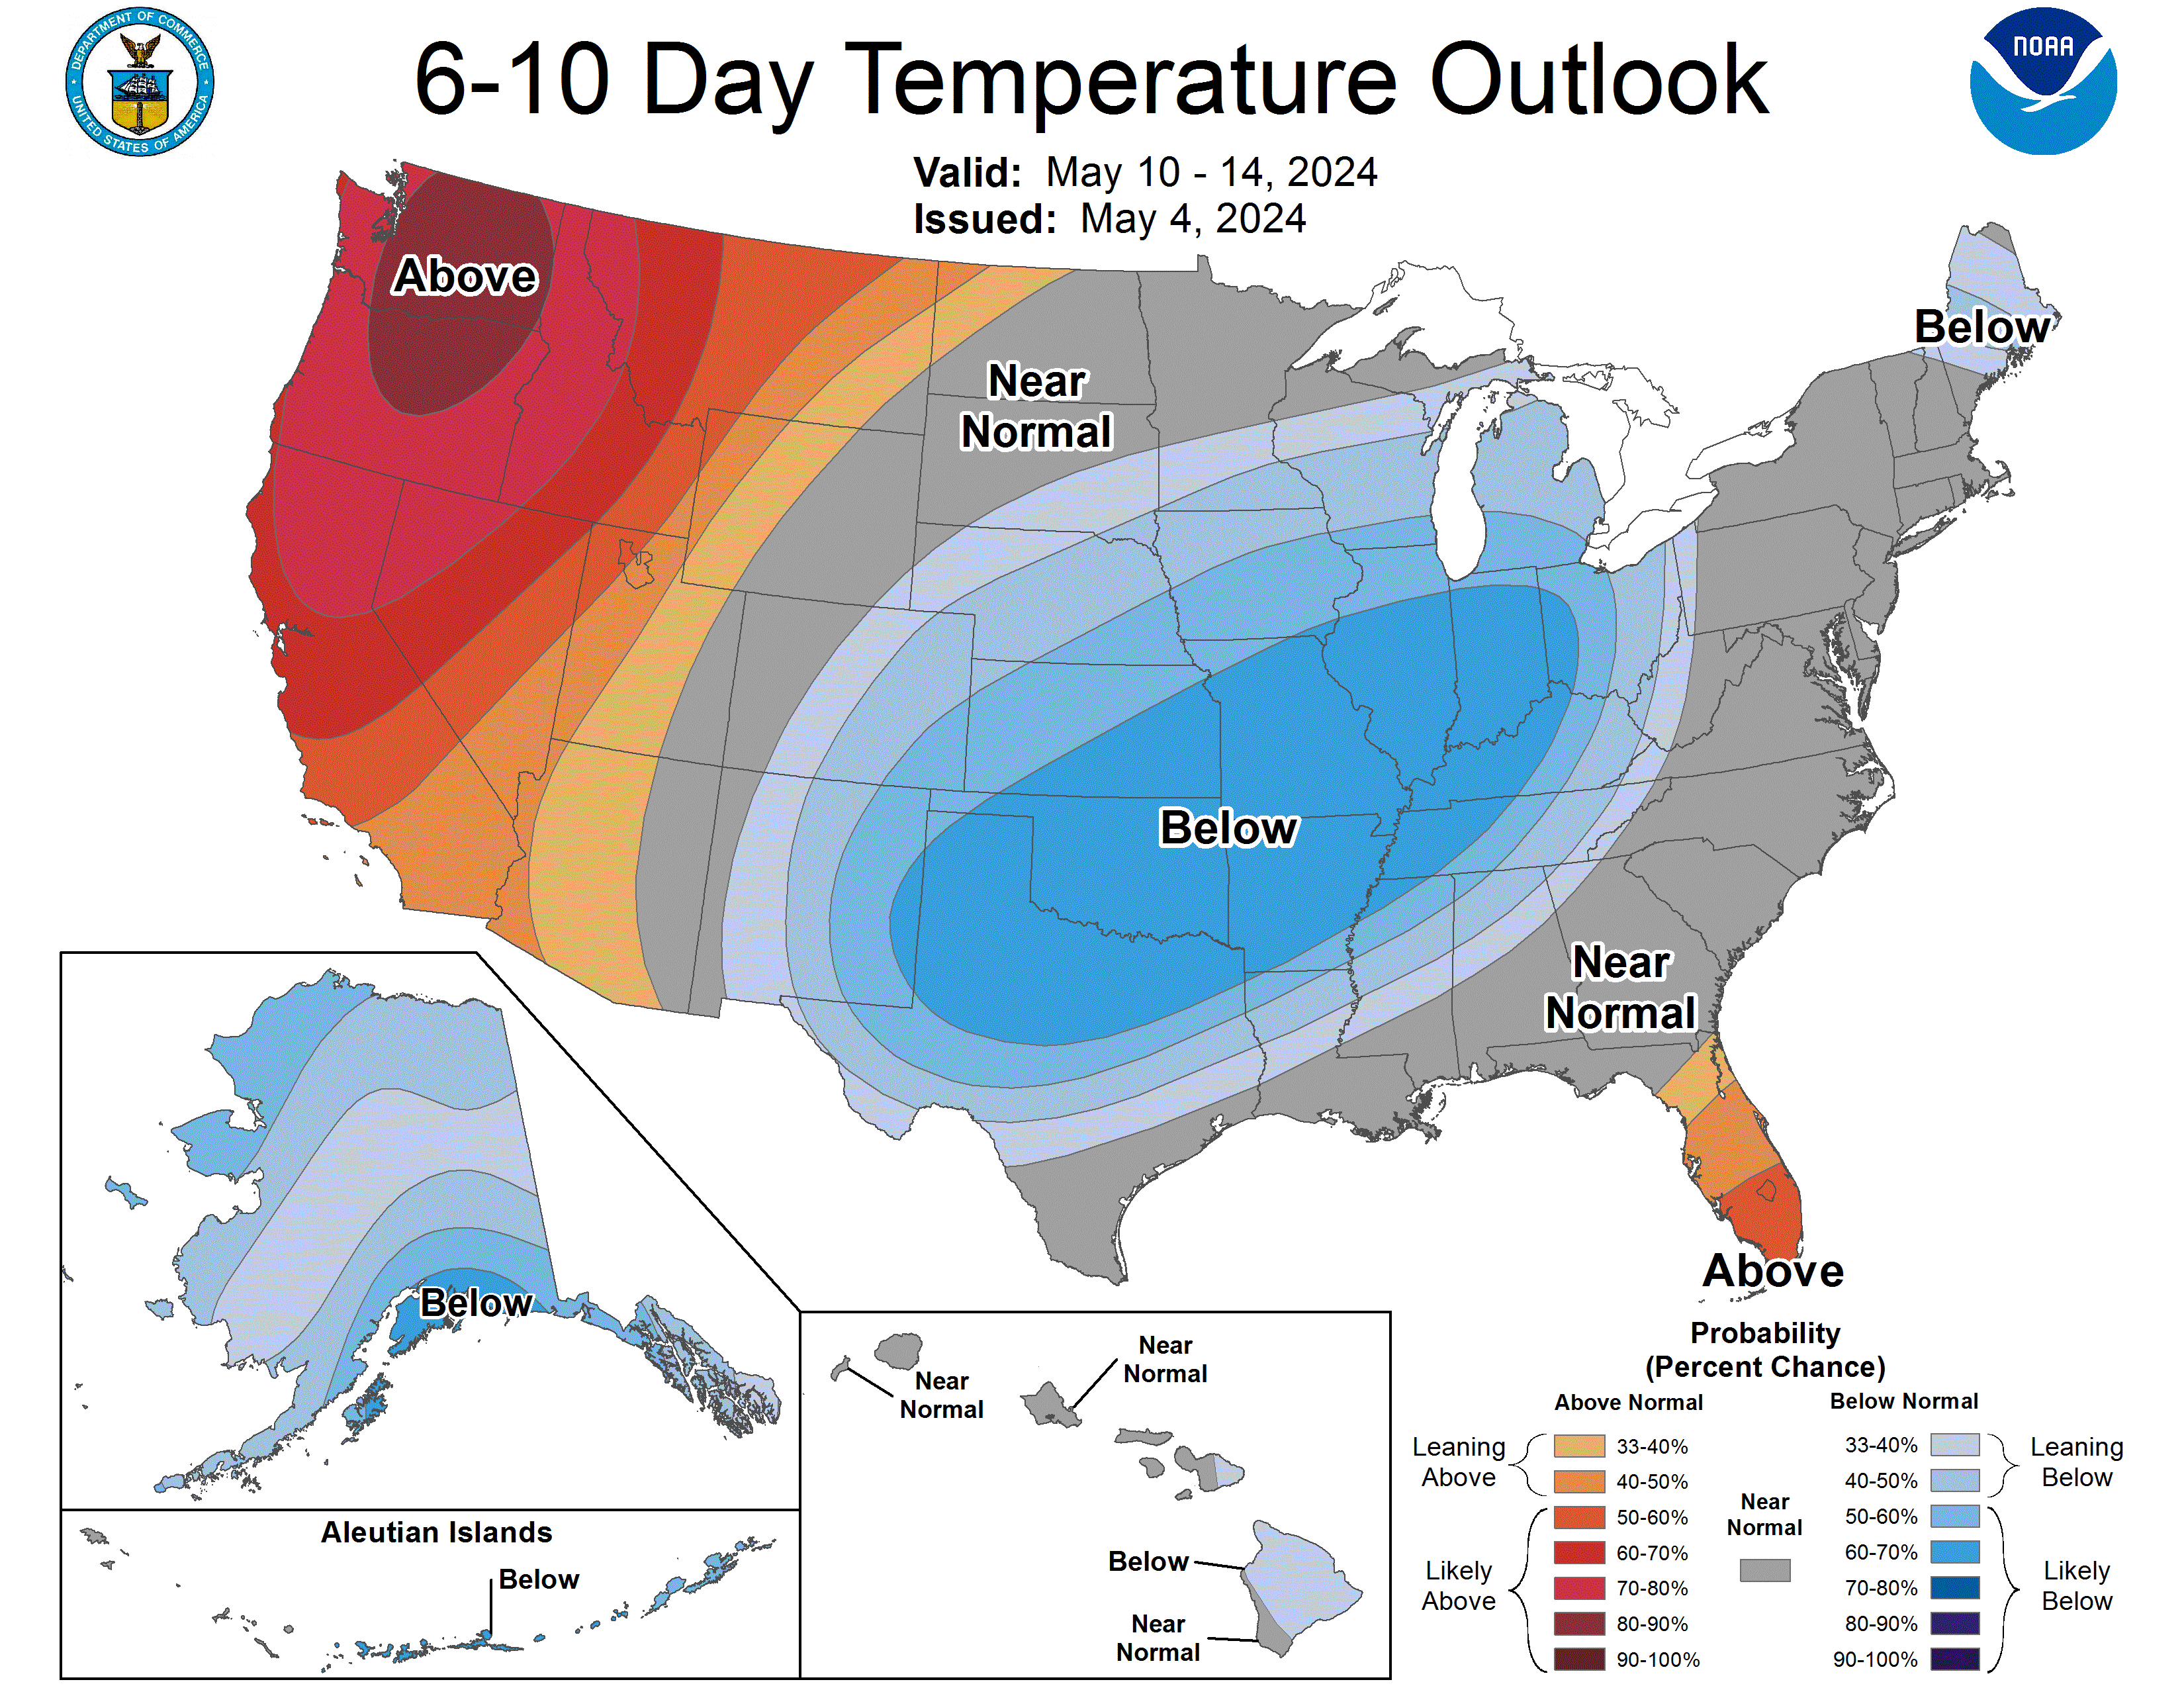 6-10 Day Outlook